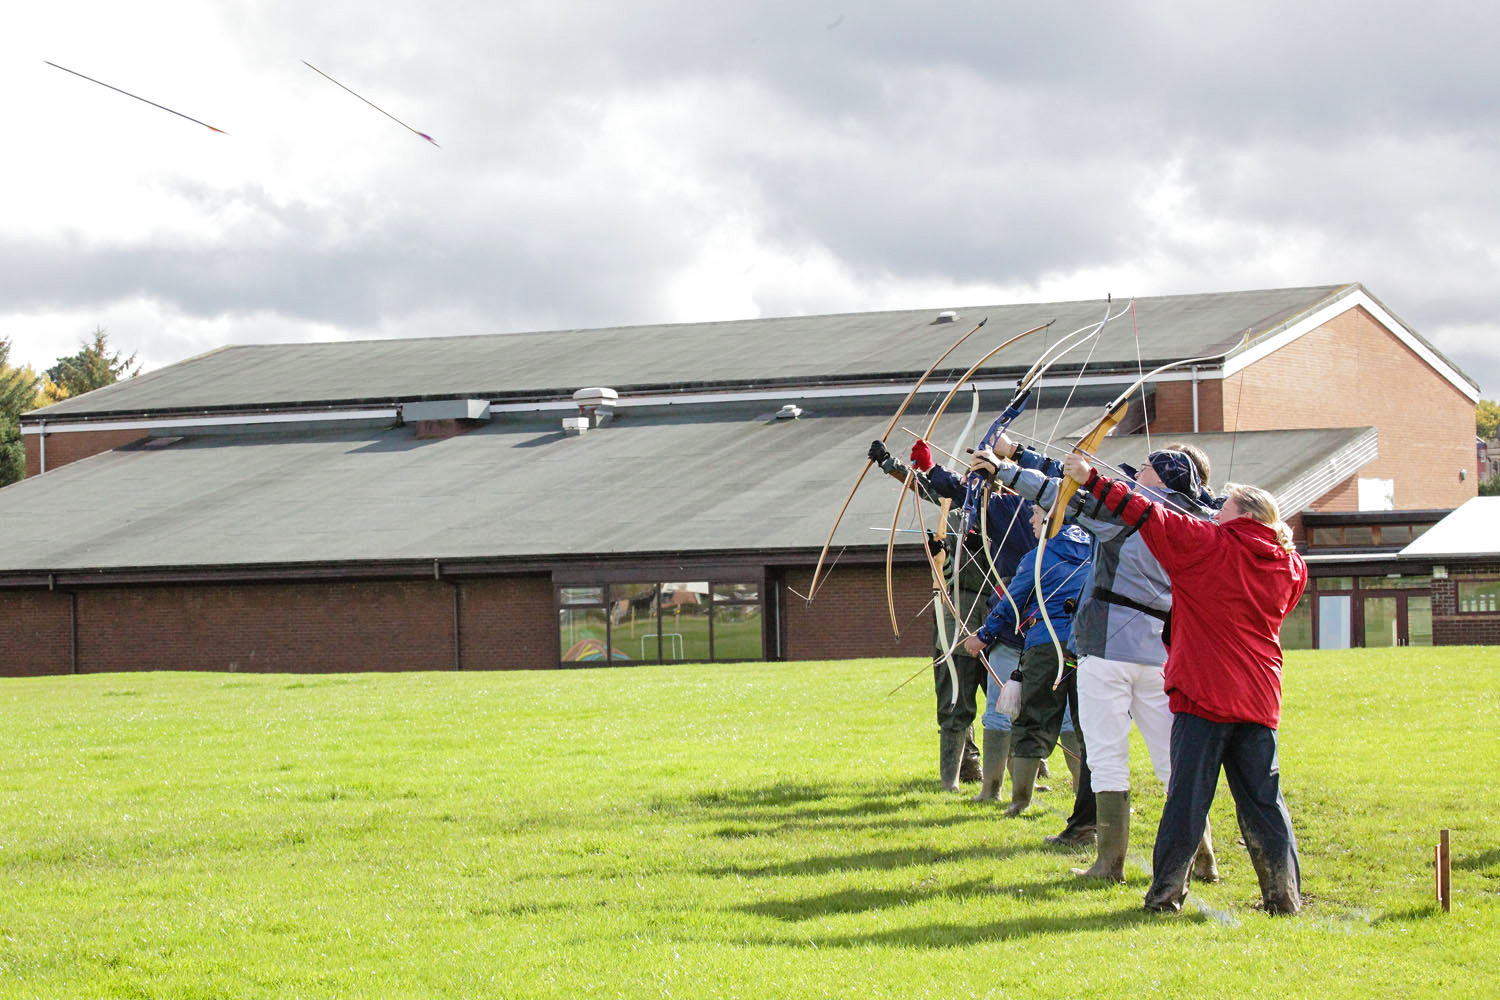 Archery:  Long-range "Clout" competition organised by Powys Archery Association in Llandindod Wells.